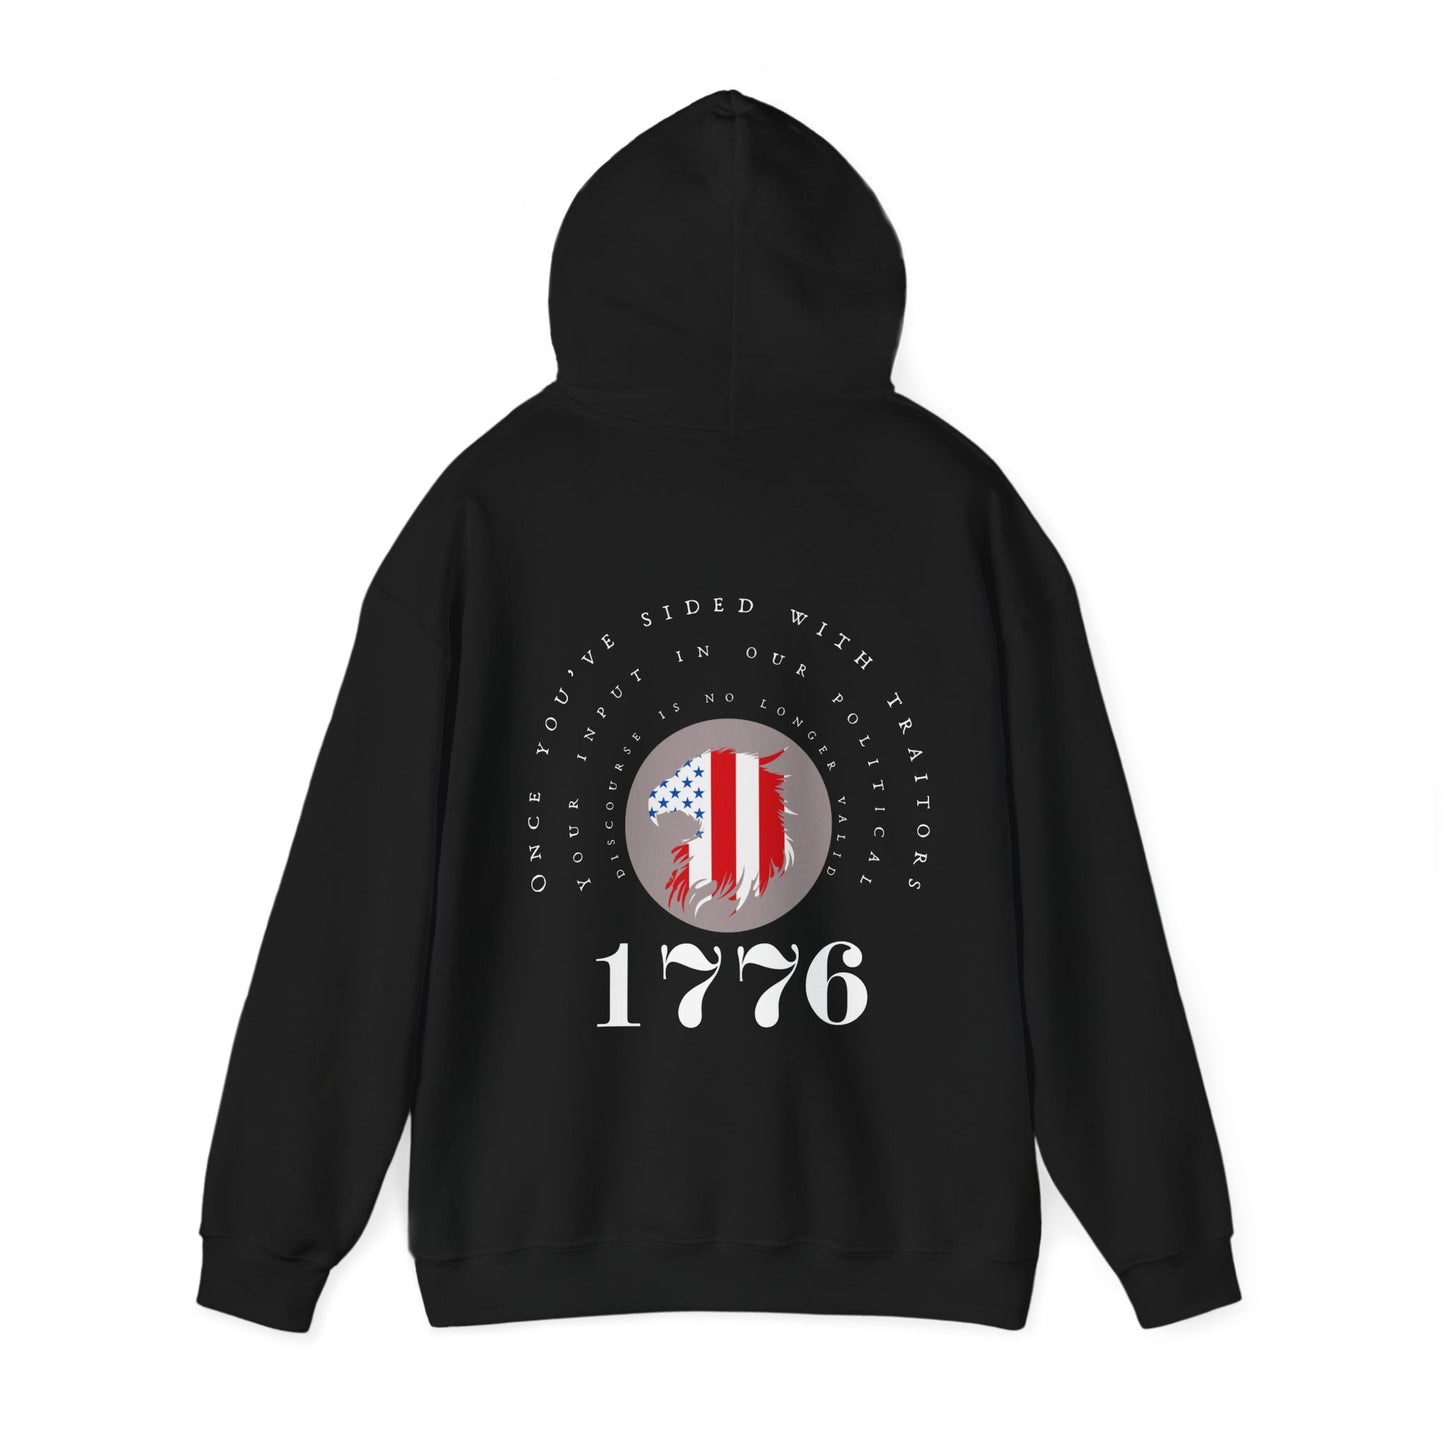 Once You've Sided With Traitors - Eagle Hoodie